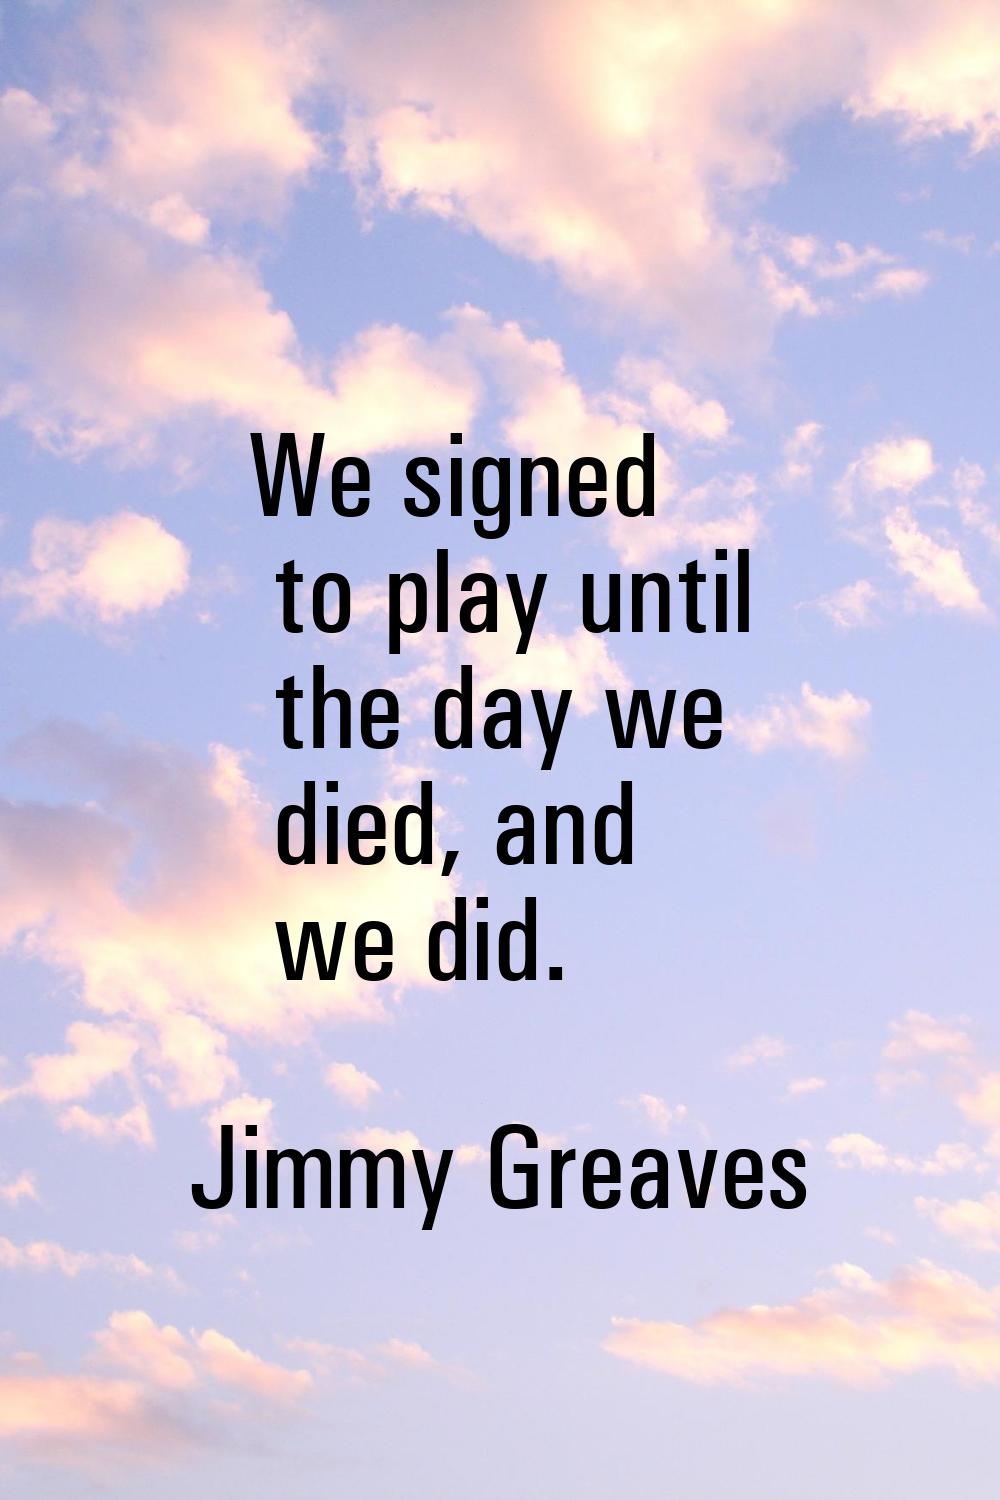 We signed to play until the day we died, and we did.